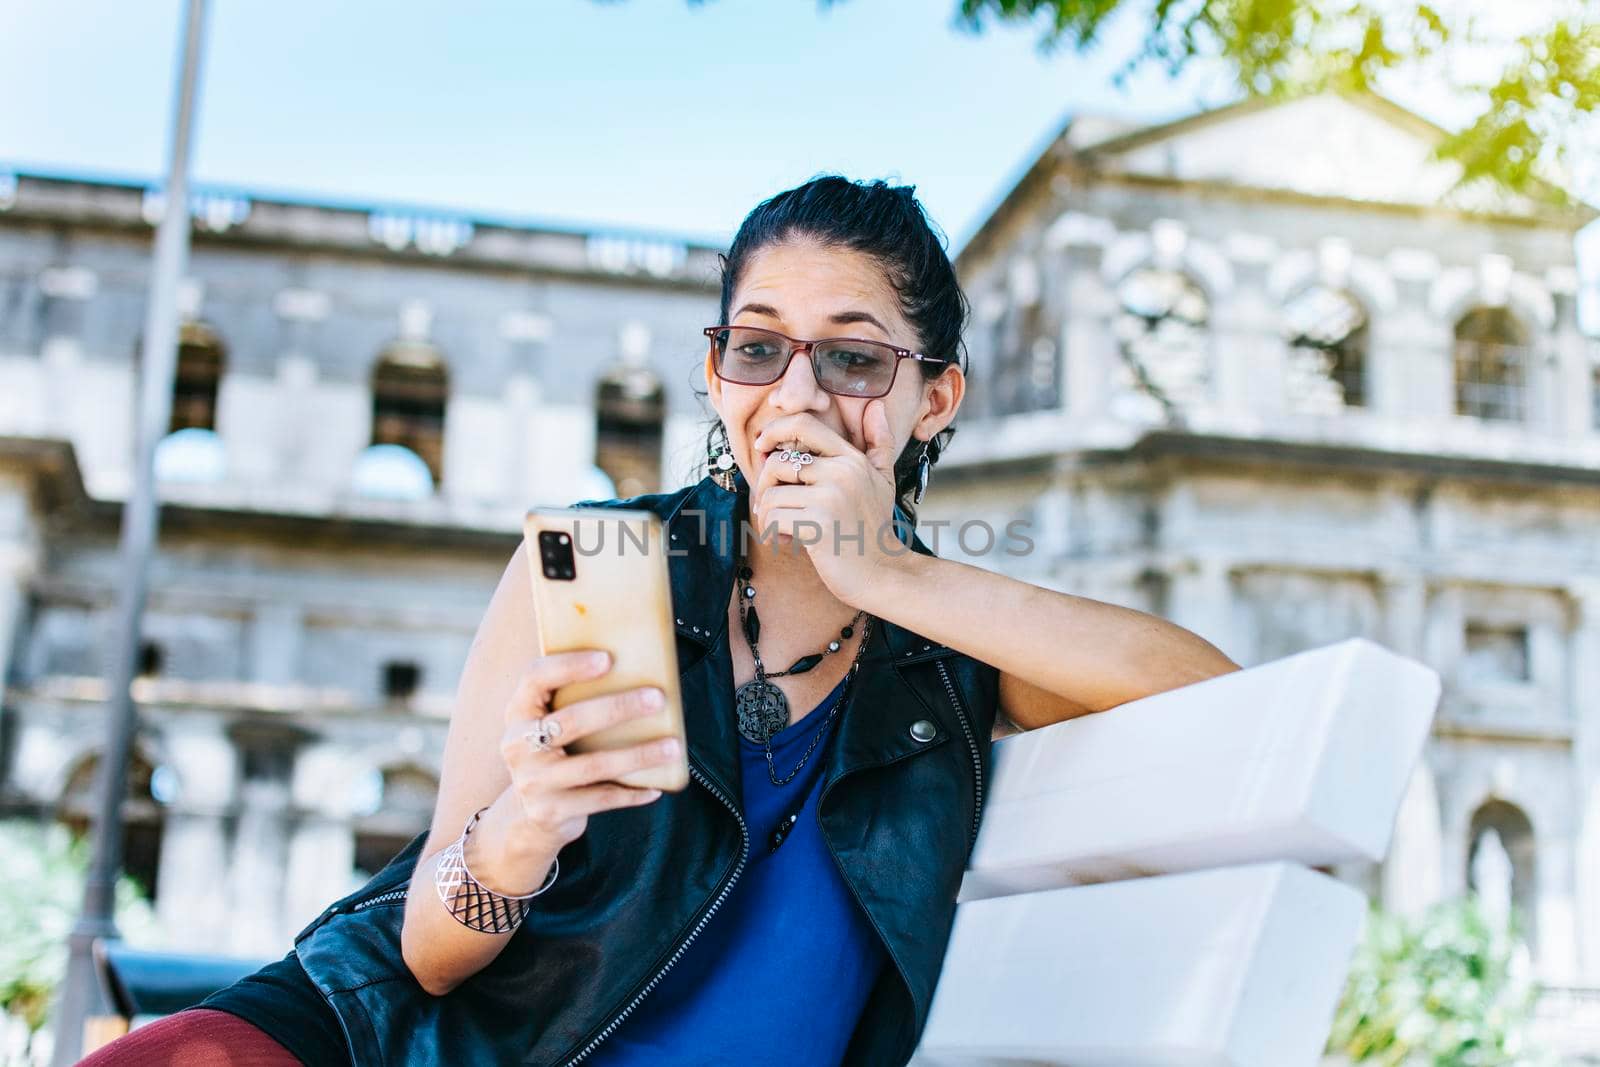 An attractive girl sitting on the cell phone smiling, Girl sitting on a bench texting on her cell phone, Urban style girl sitting on a bench with her cell phone